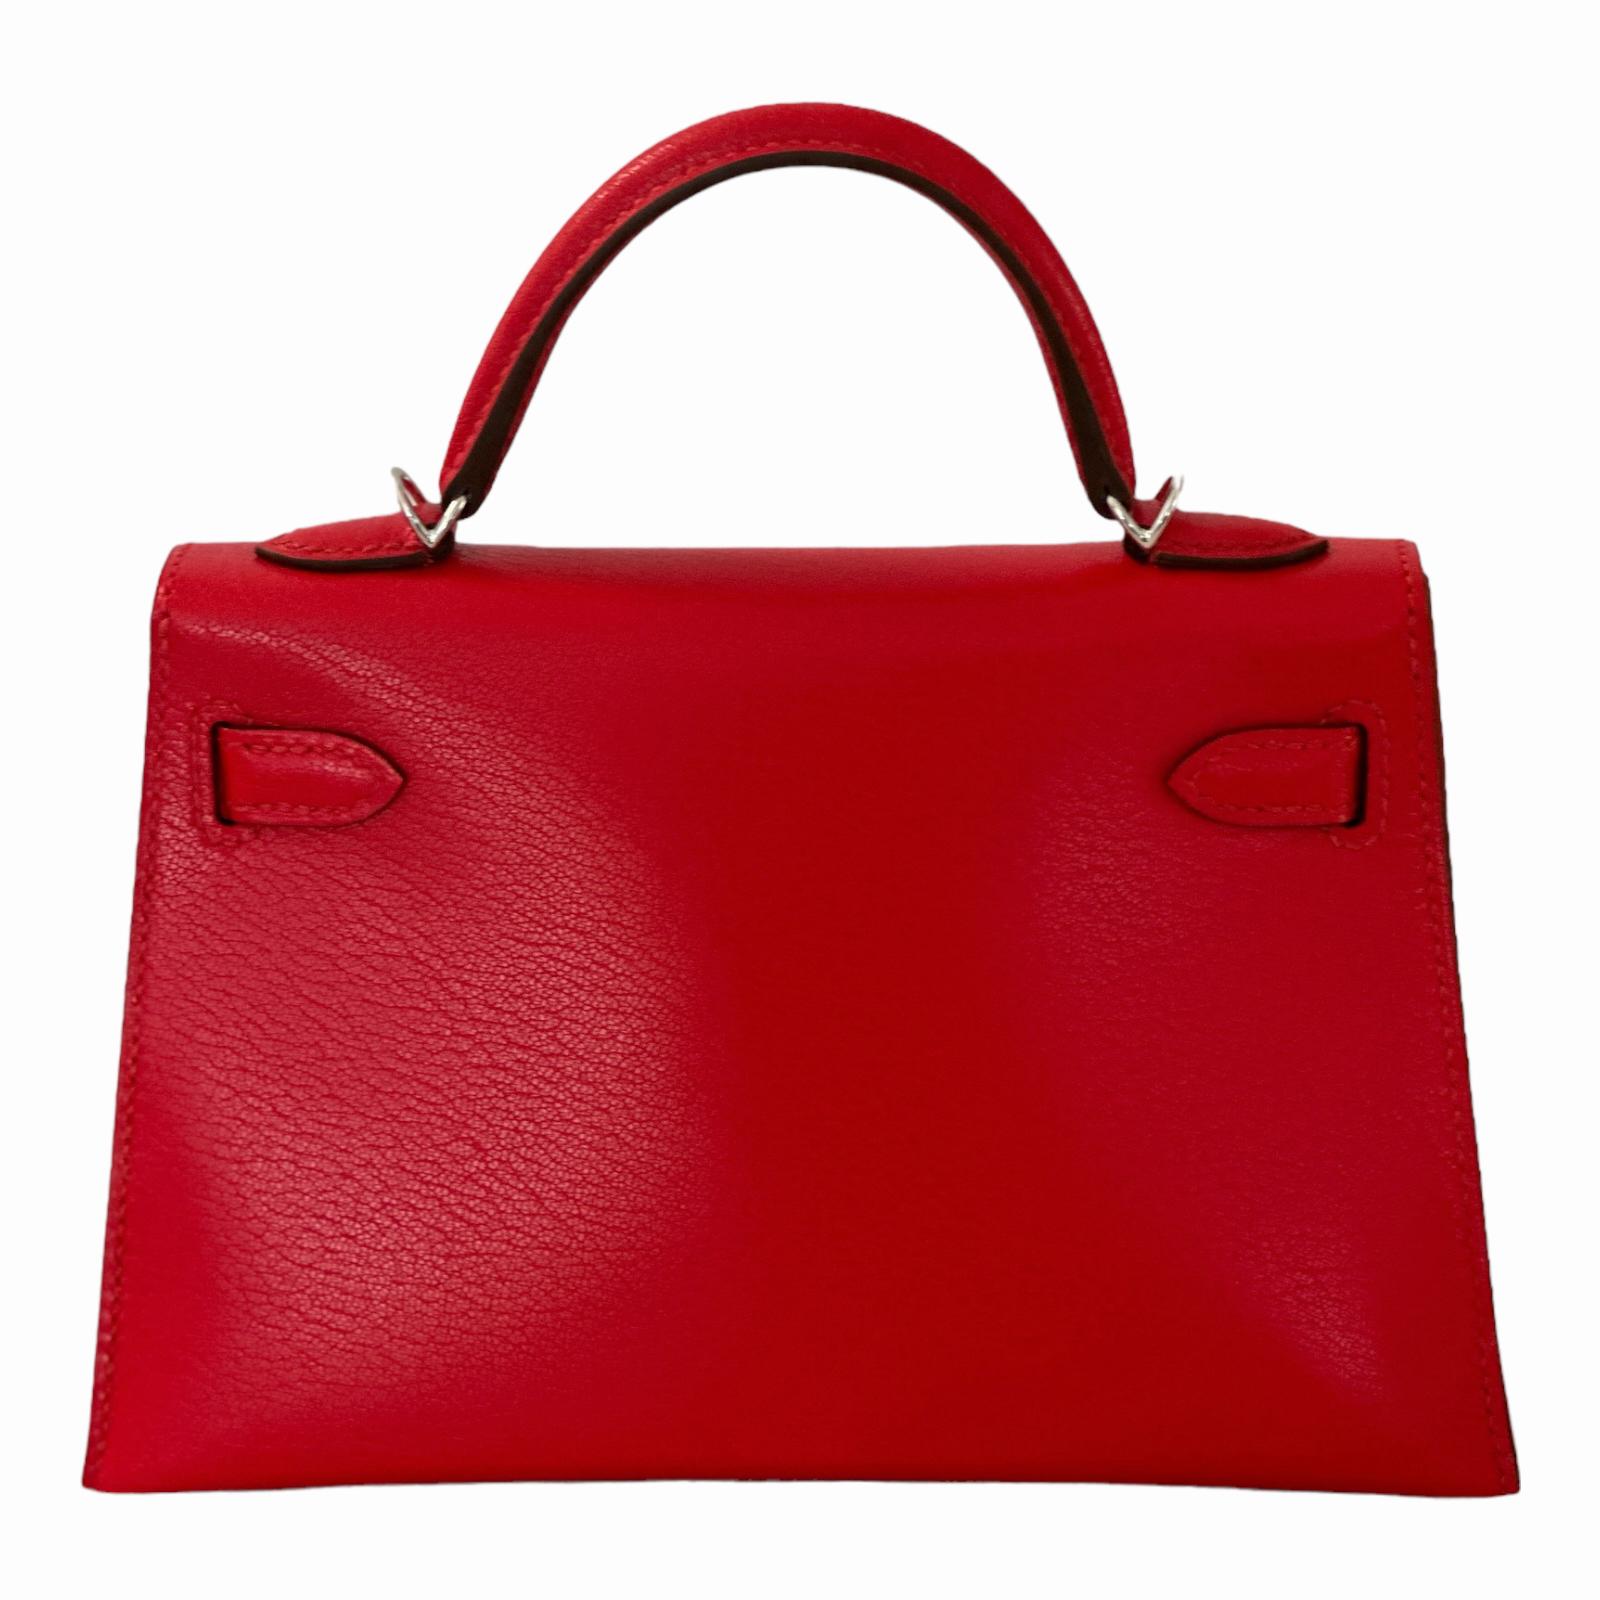 Guaranteed authentic Hermes Kelly 20 Sellier bag featured in stunning Rouge de Coeur.  
Rouge de coeur is a vibrant red, so gorgeous!
Leather is Chevre, one of the most collected leathers because of its durability 
The Hermes Kelly 20 is a small